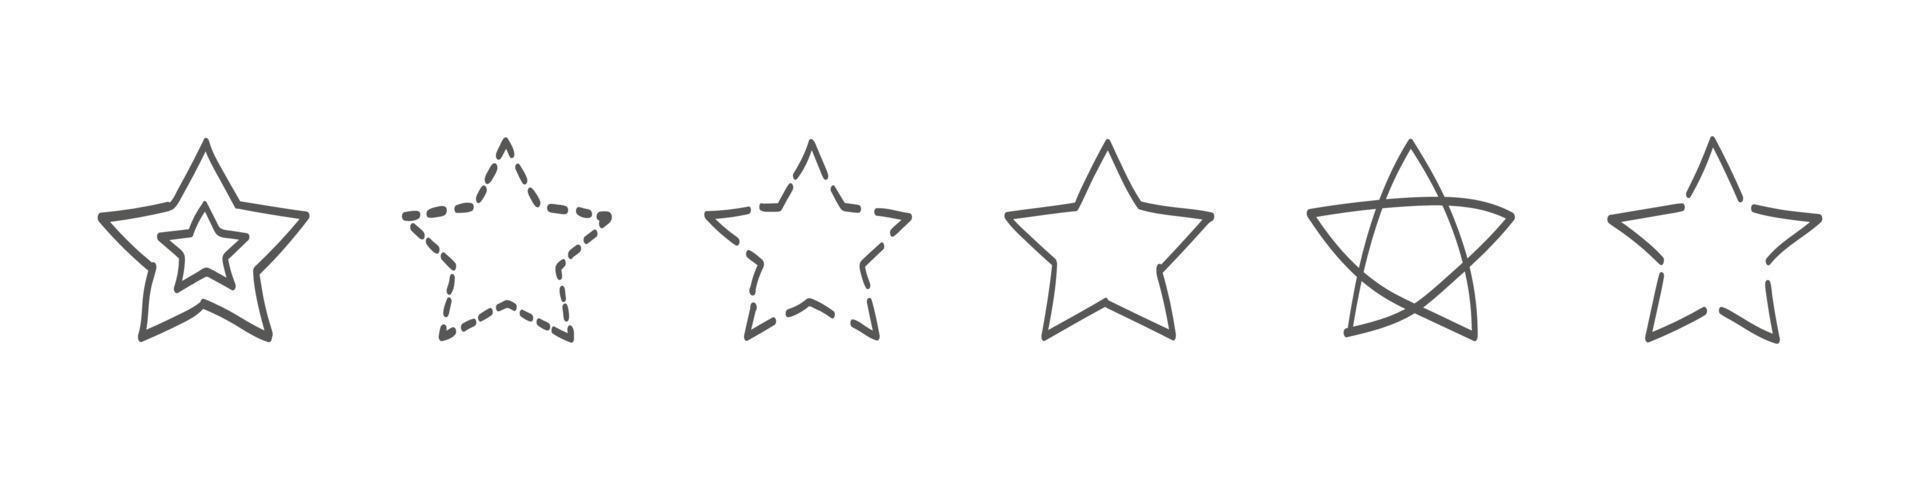 Star doodle collection. Set of hand drawn stars. Scribble illustrations. Vector illustration